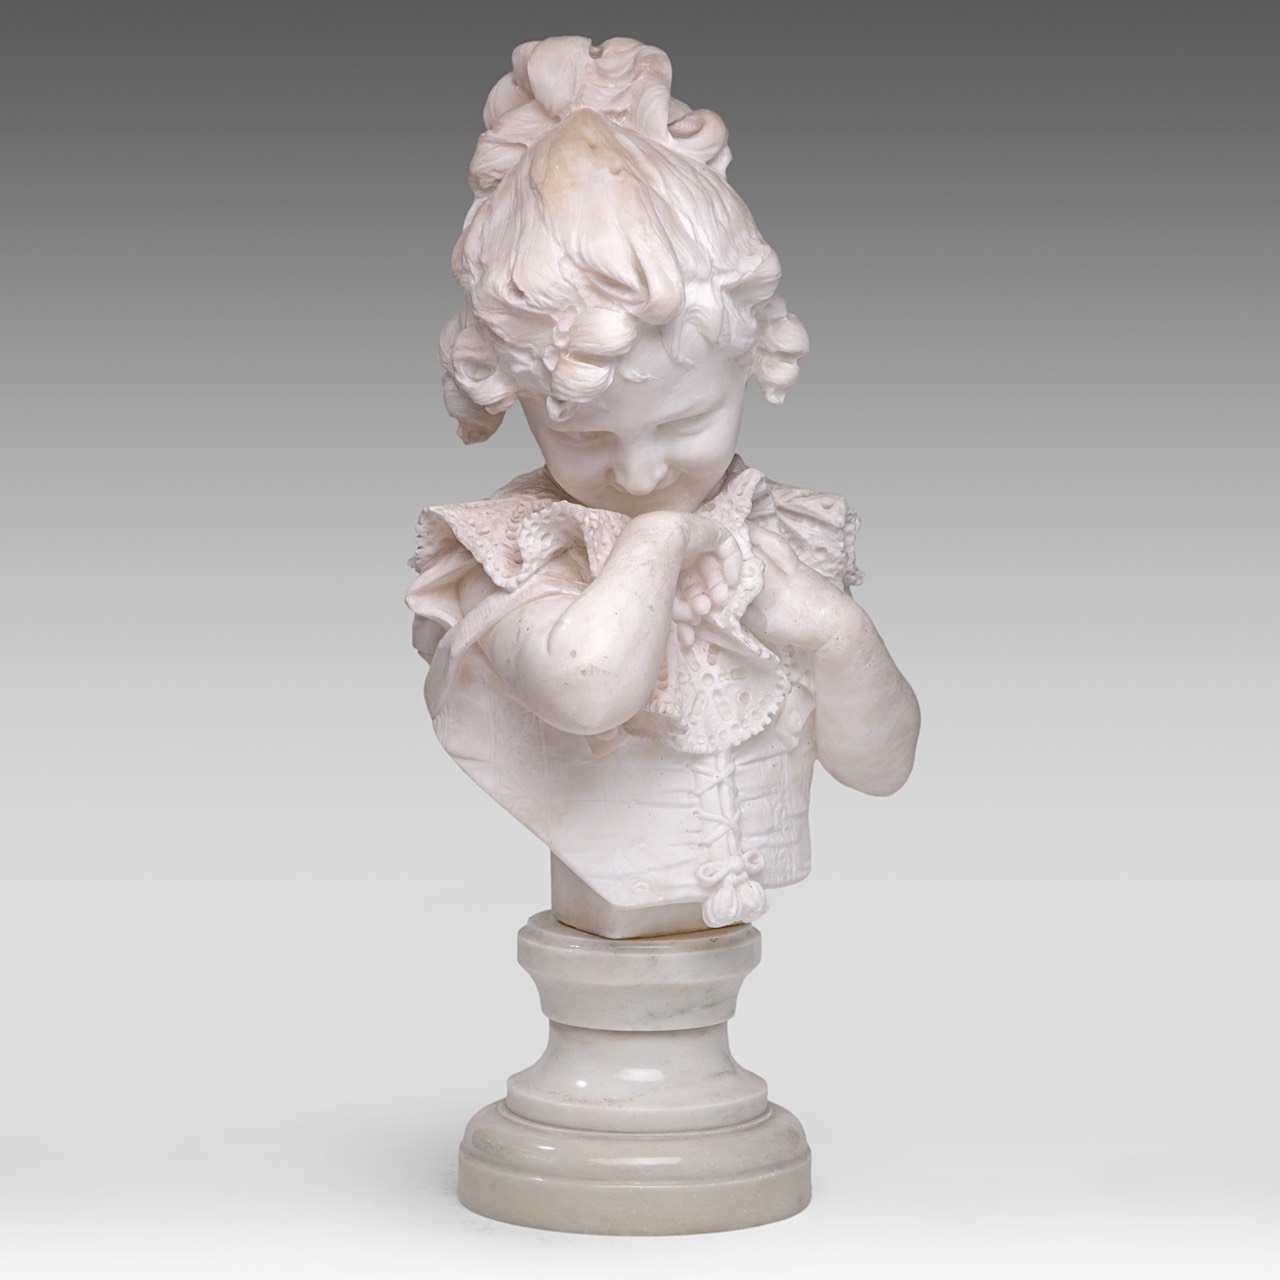 Studio of Pietro Bazzanti (1825-1895), the Carrara marble bust of a girl with a lacework collar, H 6 - Image 6 of 7